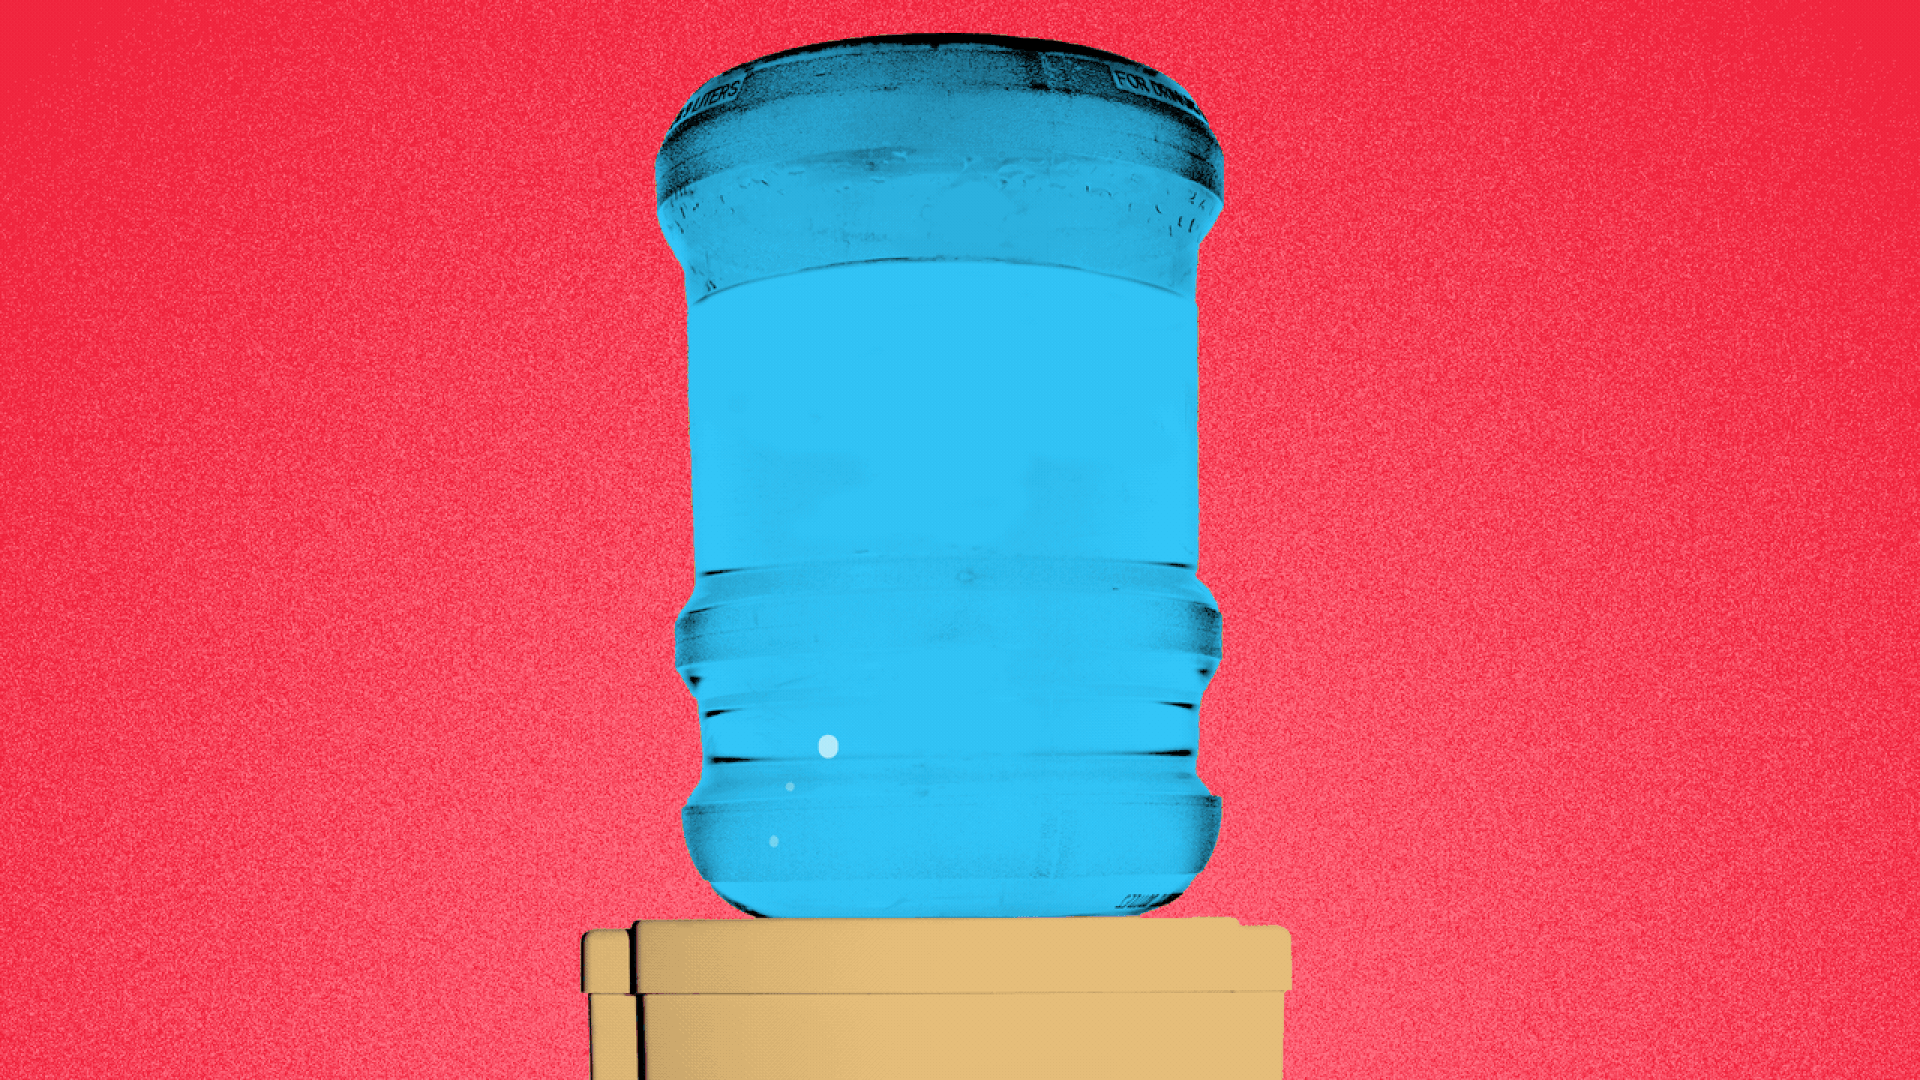 Illustration of a water cooler, with the word 